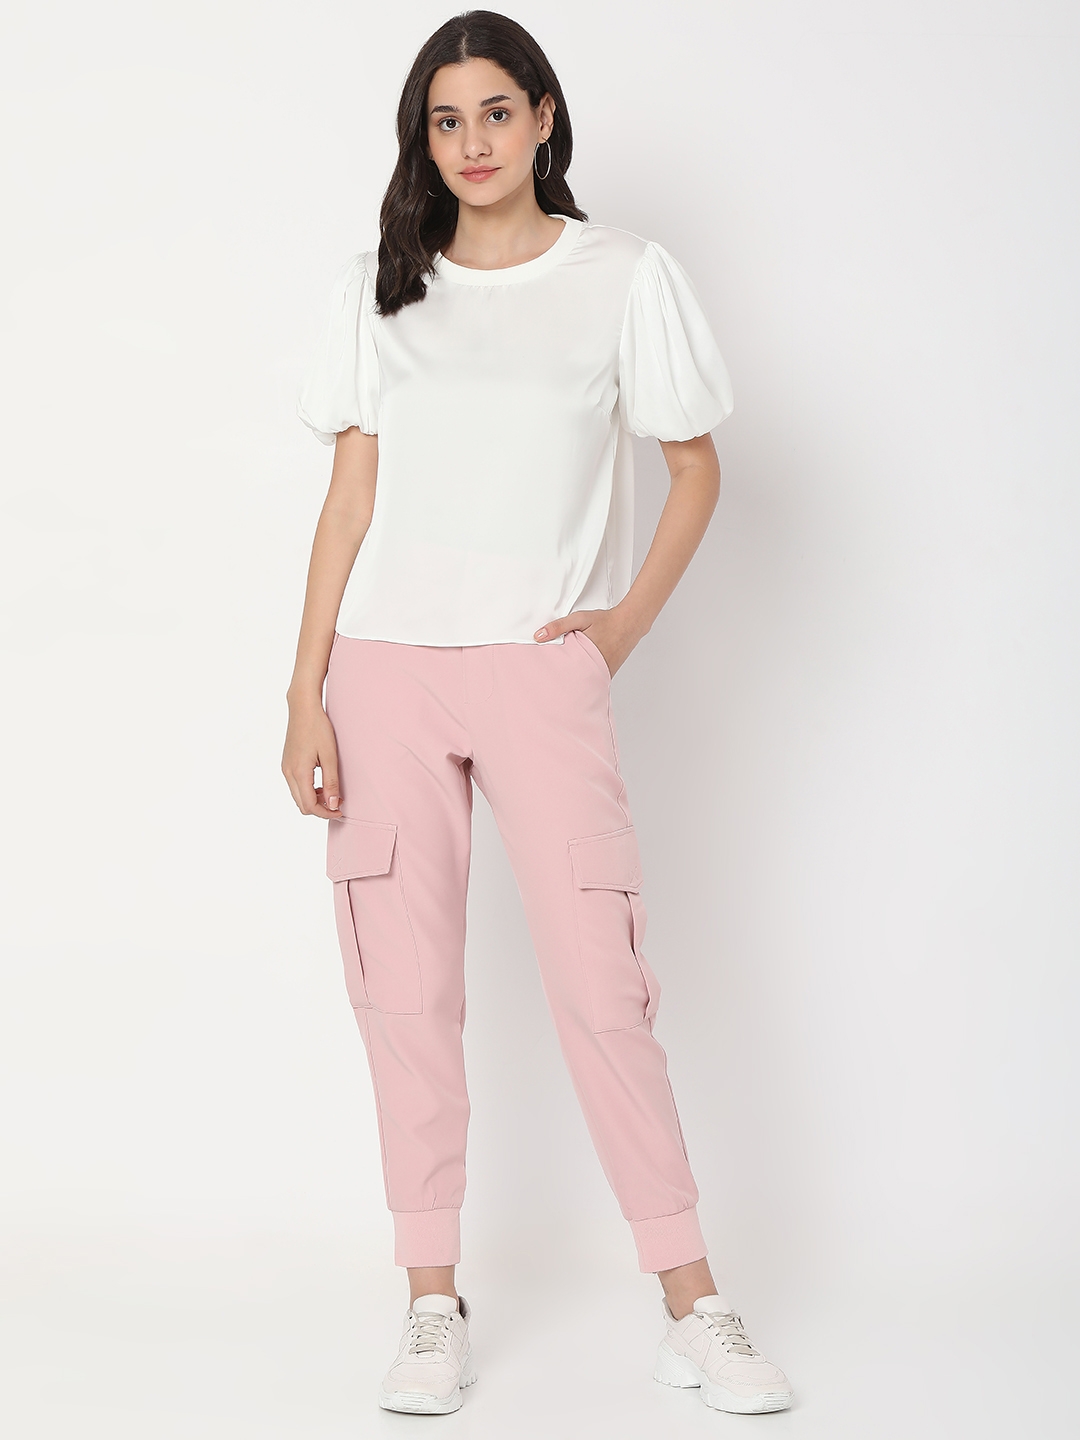 spykar | Women's Pink Cotton Solid Trackpants 5